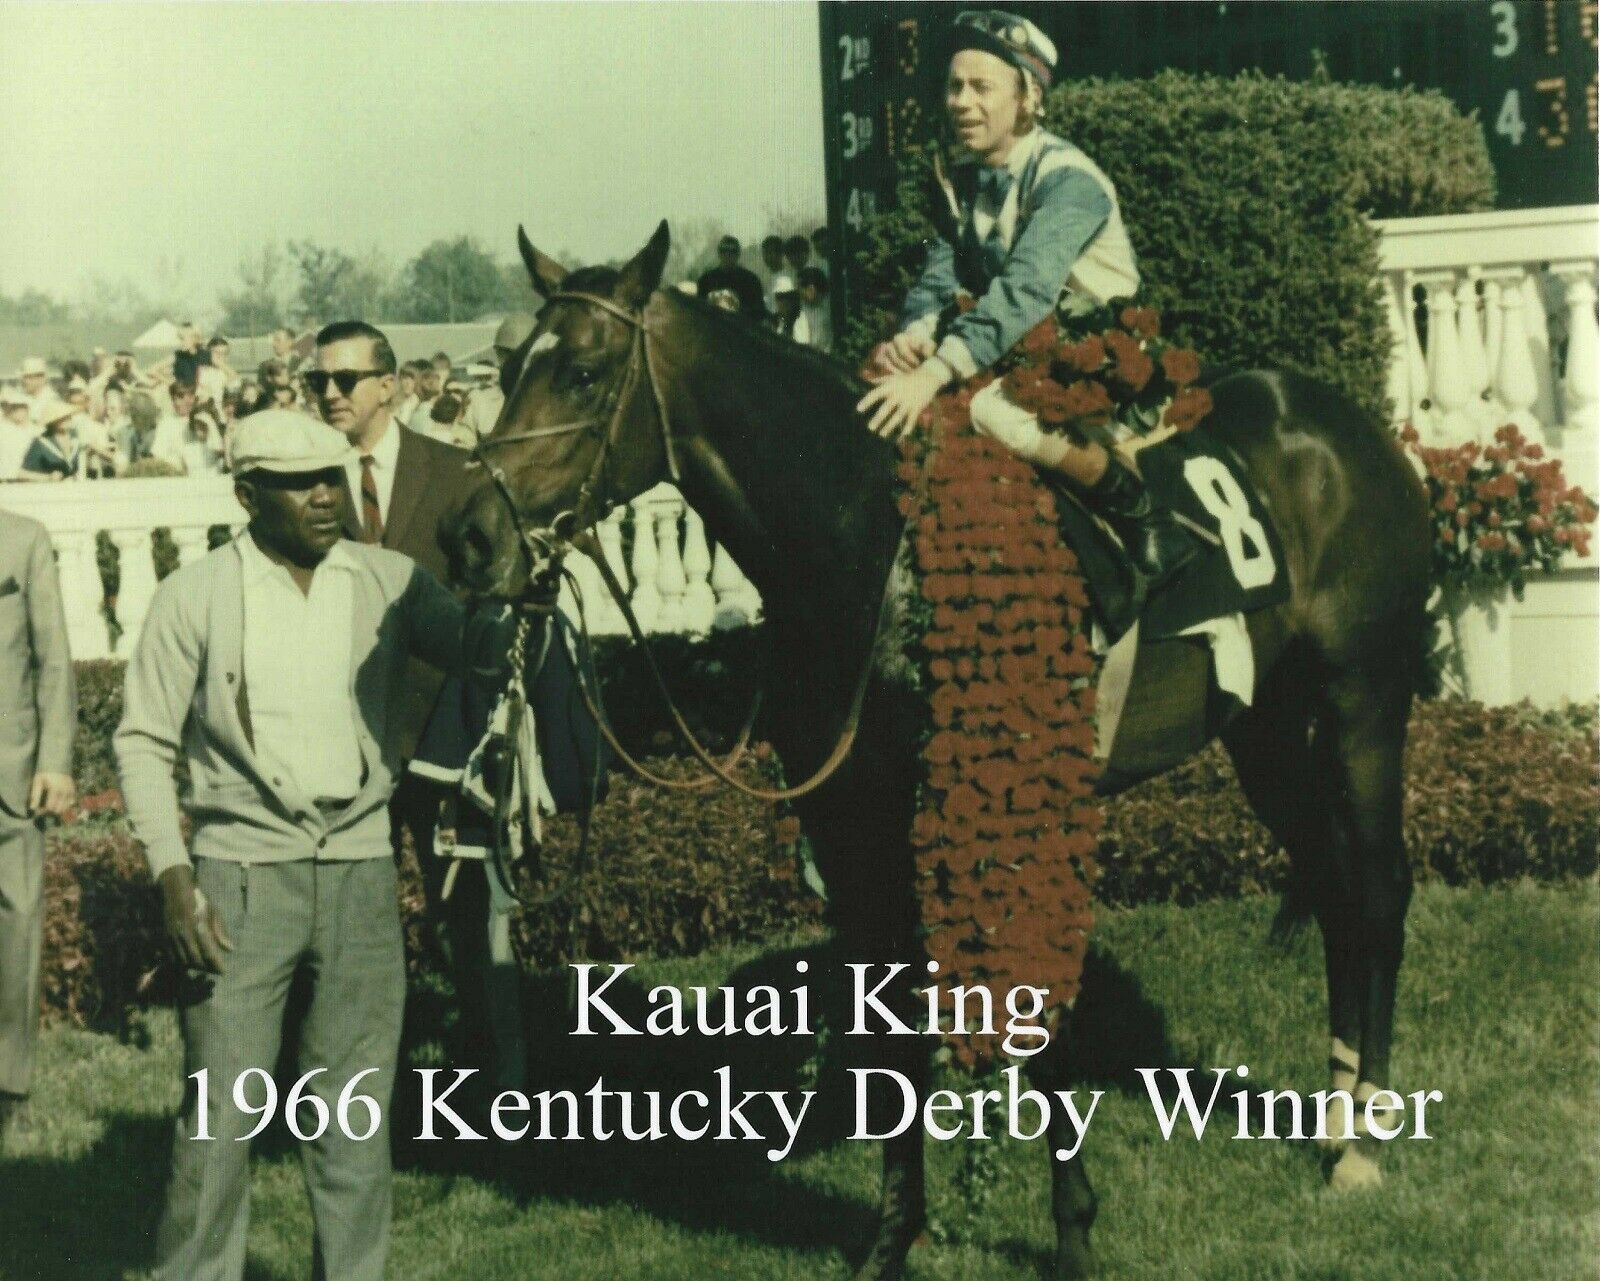 1966 - Kauai King In The Kentucky Derby Winners Circle - Color - #2 - 10" X 8"